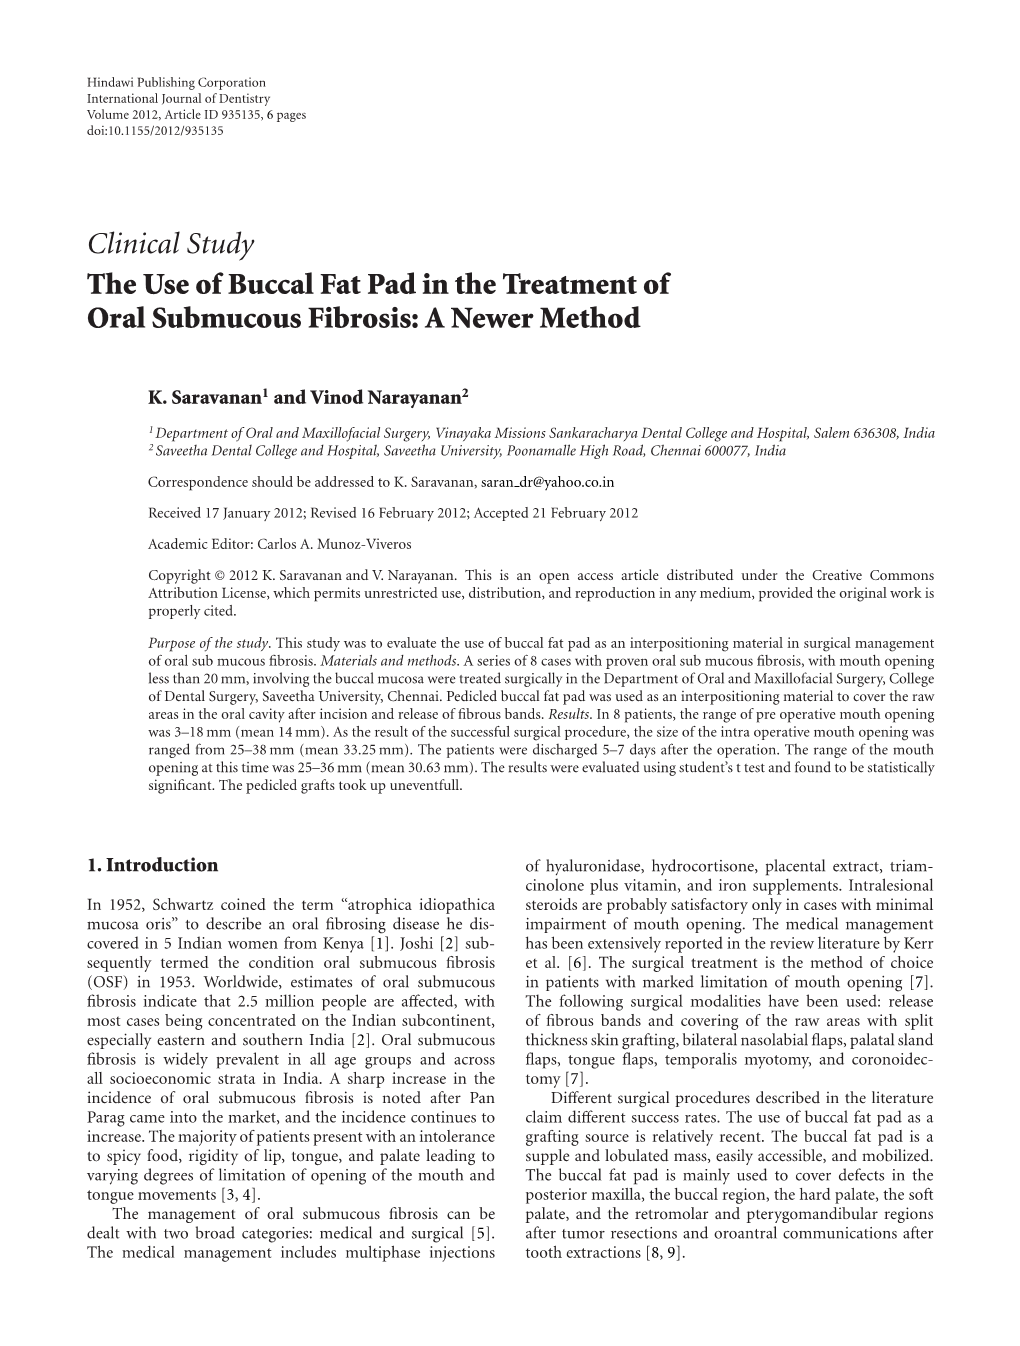 Clinical Study the Use of Buccal Fat Pad in the Treatment of Oral Submucous Fibrosis: a Newer Method